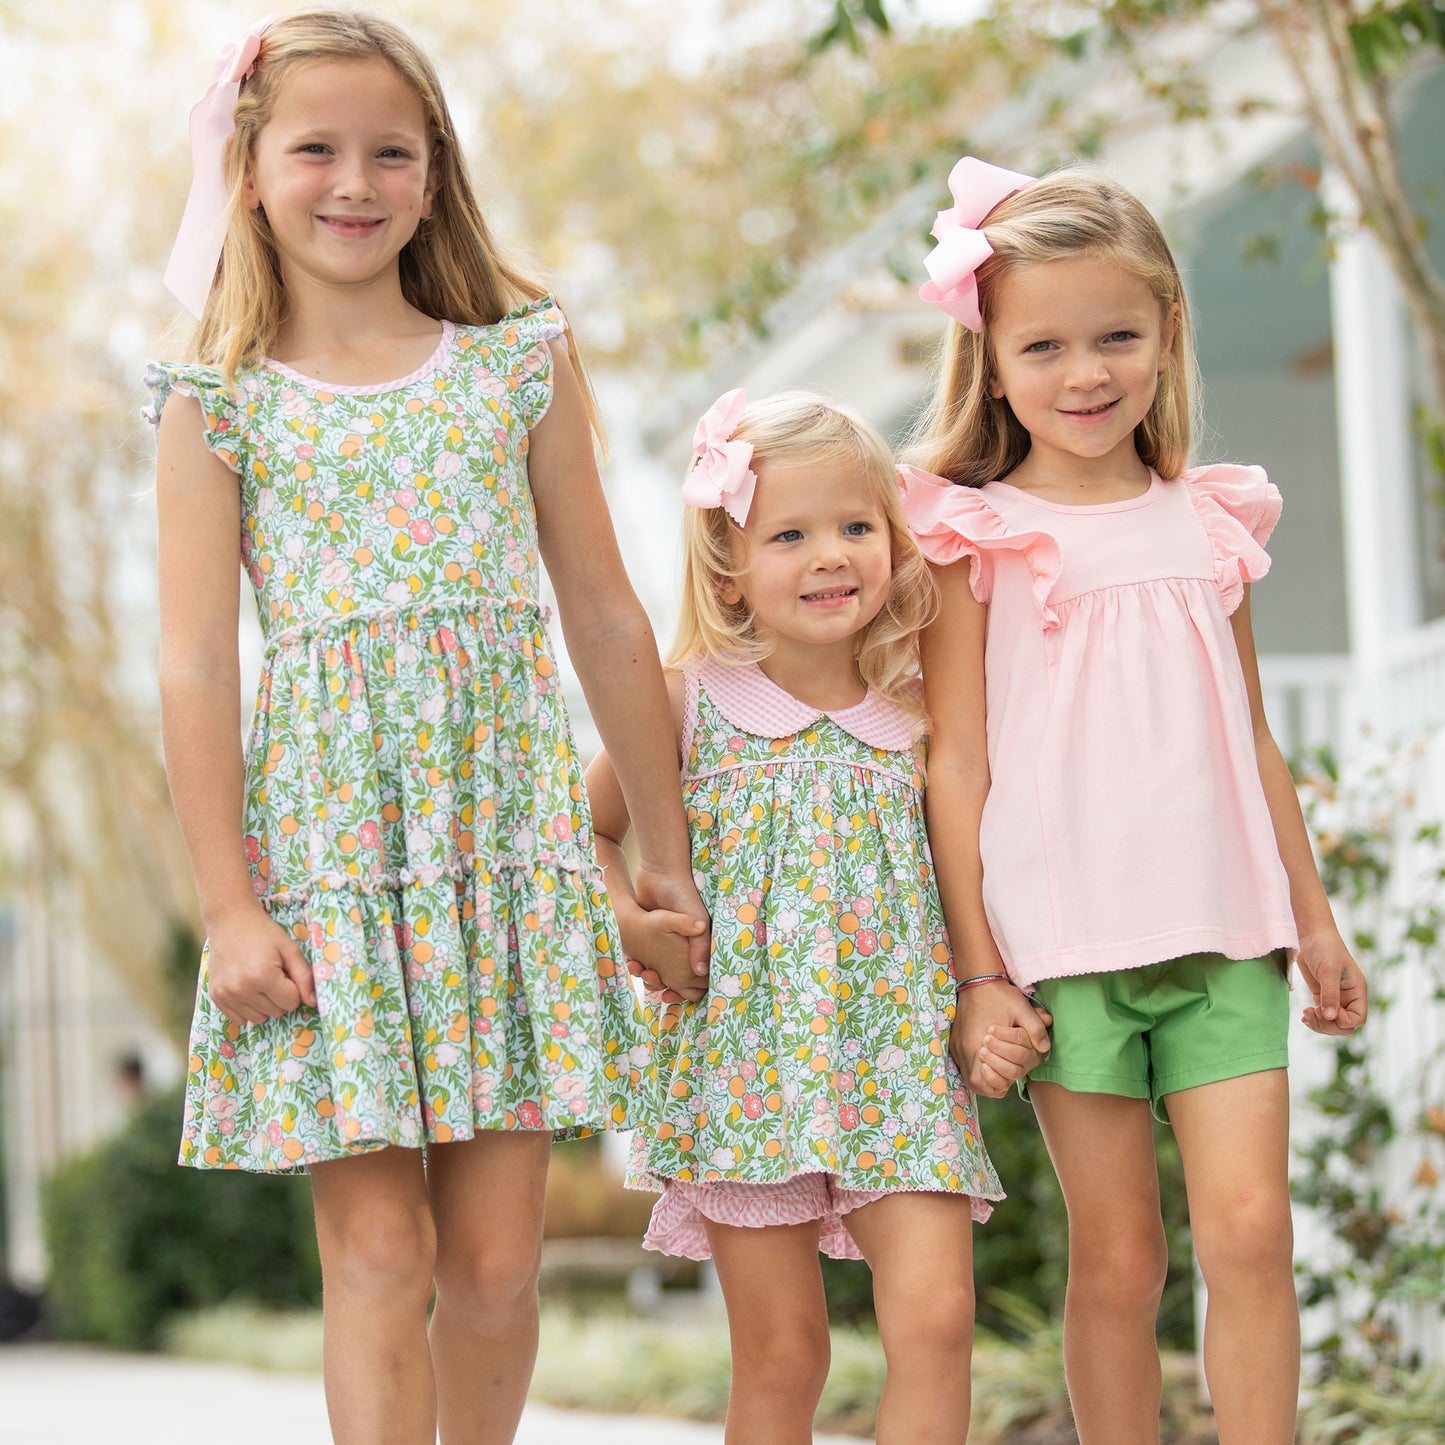 3 little girls smiling and walking hand in hand and one of them is wearing the Girl's Pink Swing Top